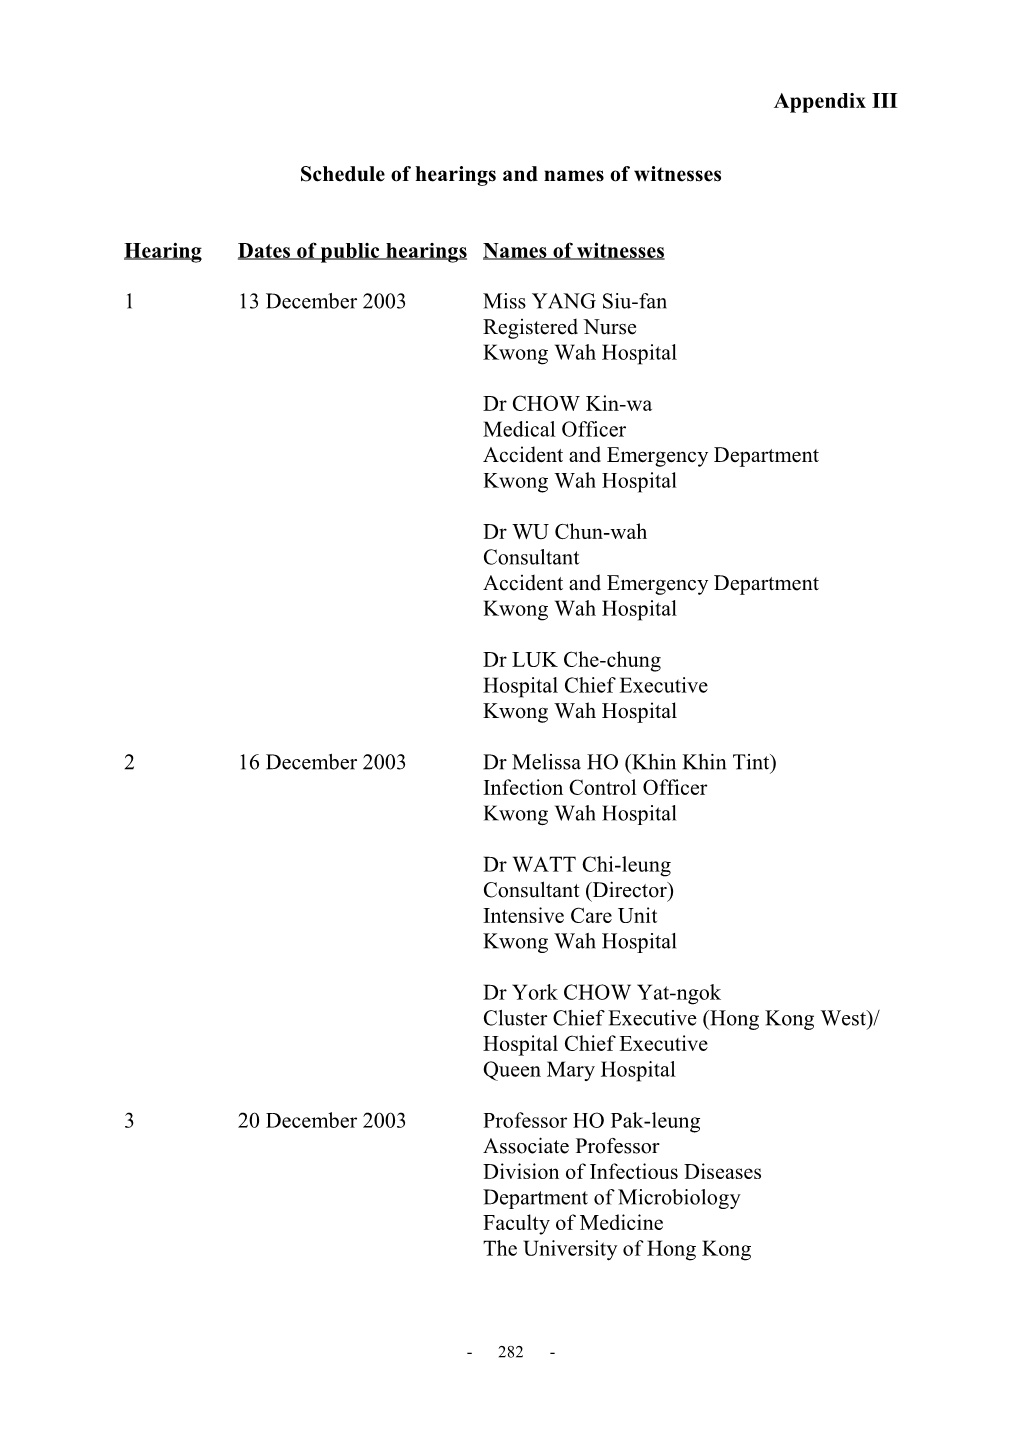 Appendix III Schedule of Hearings and Names of Witnesses Hearing Dates of Public Hearings Names of Witnesses 1 13 December 2003